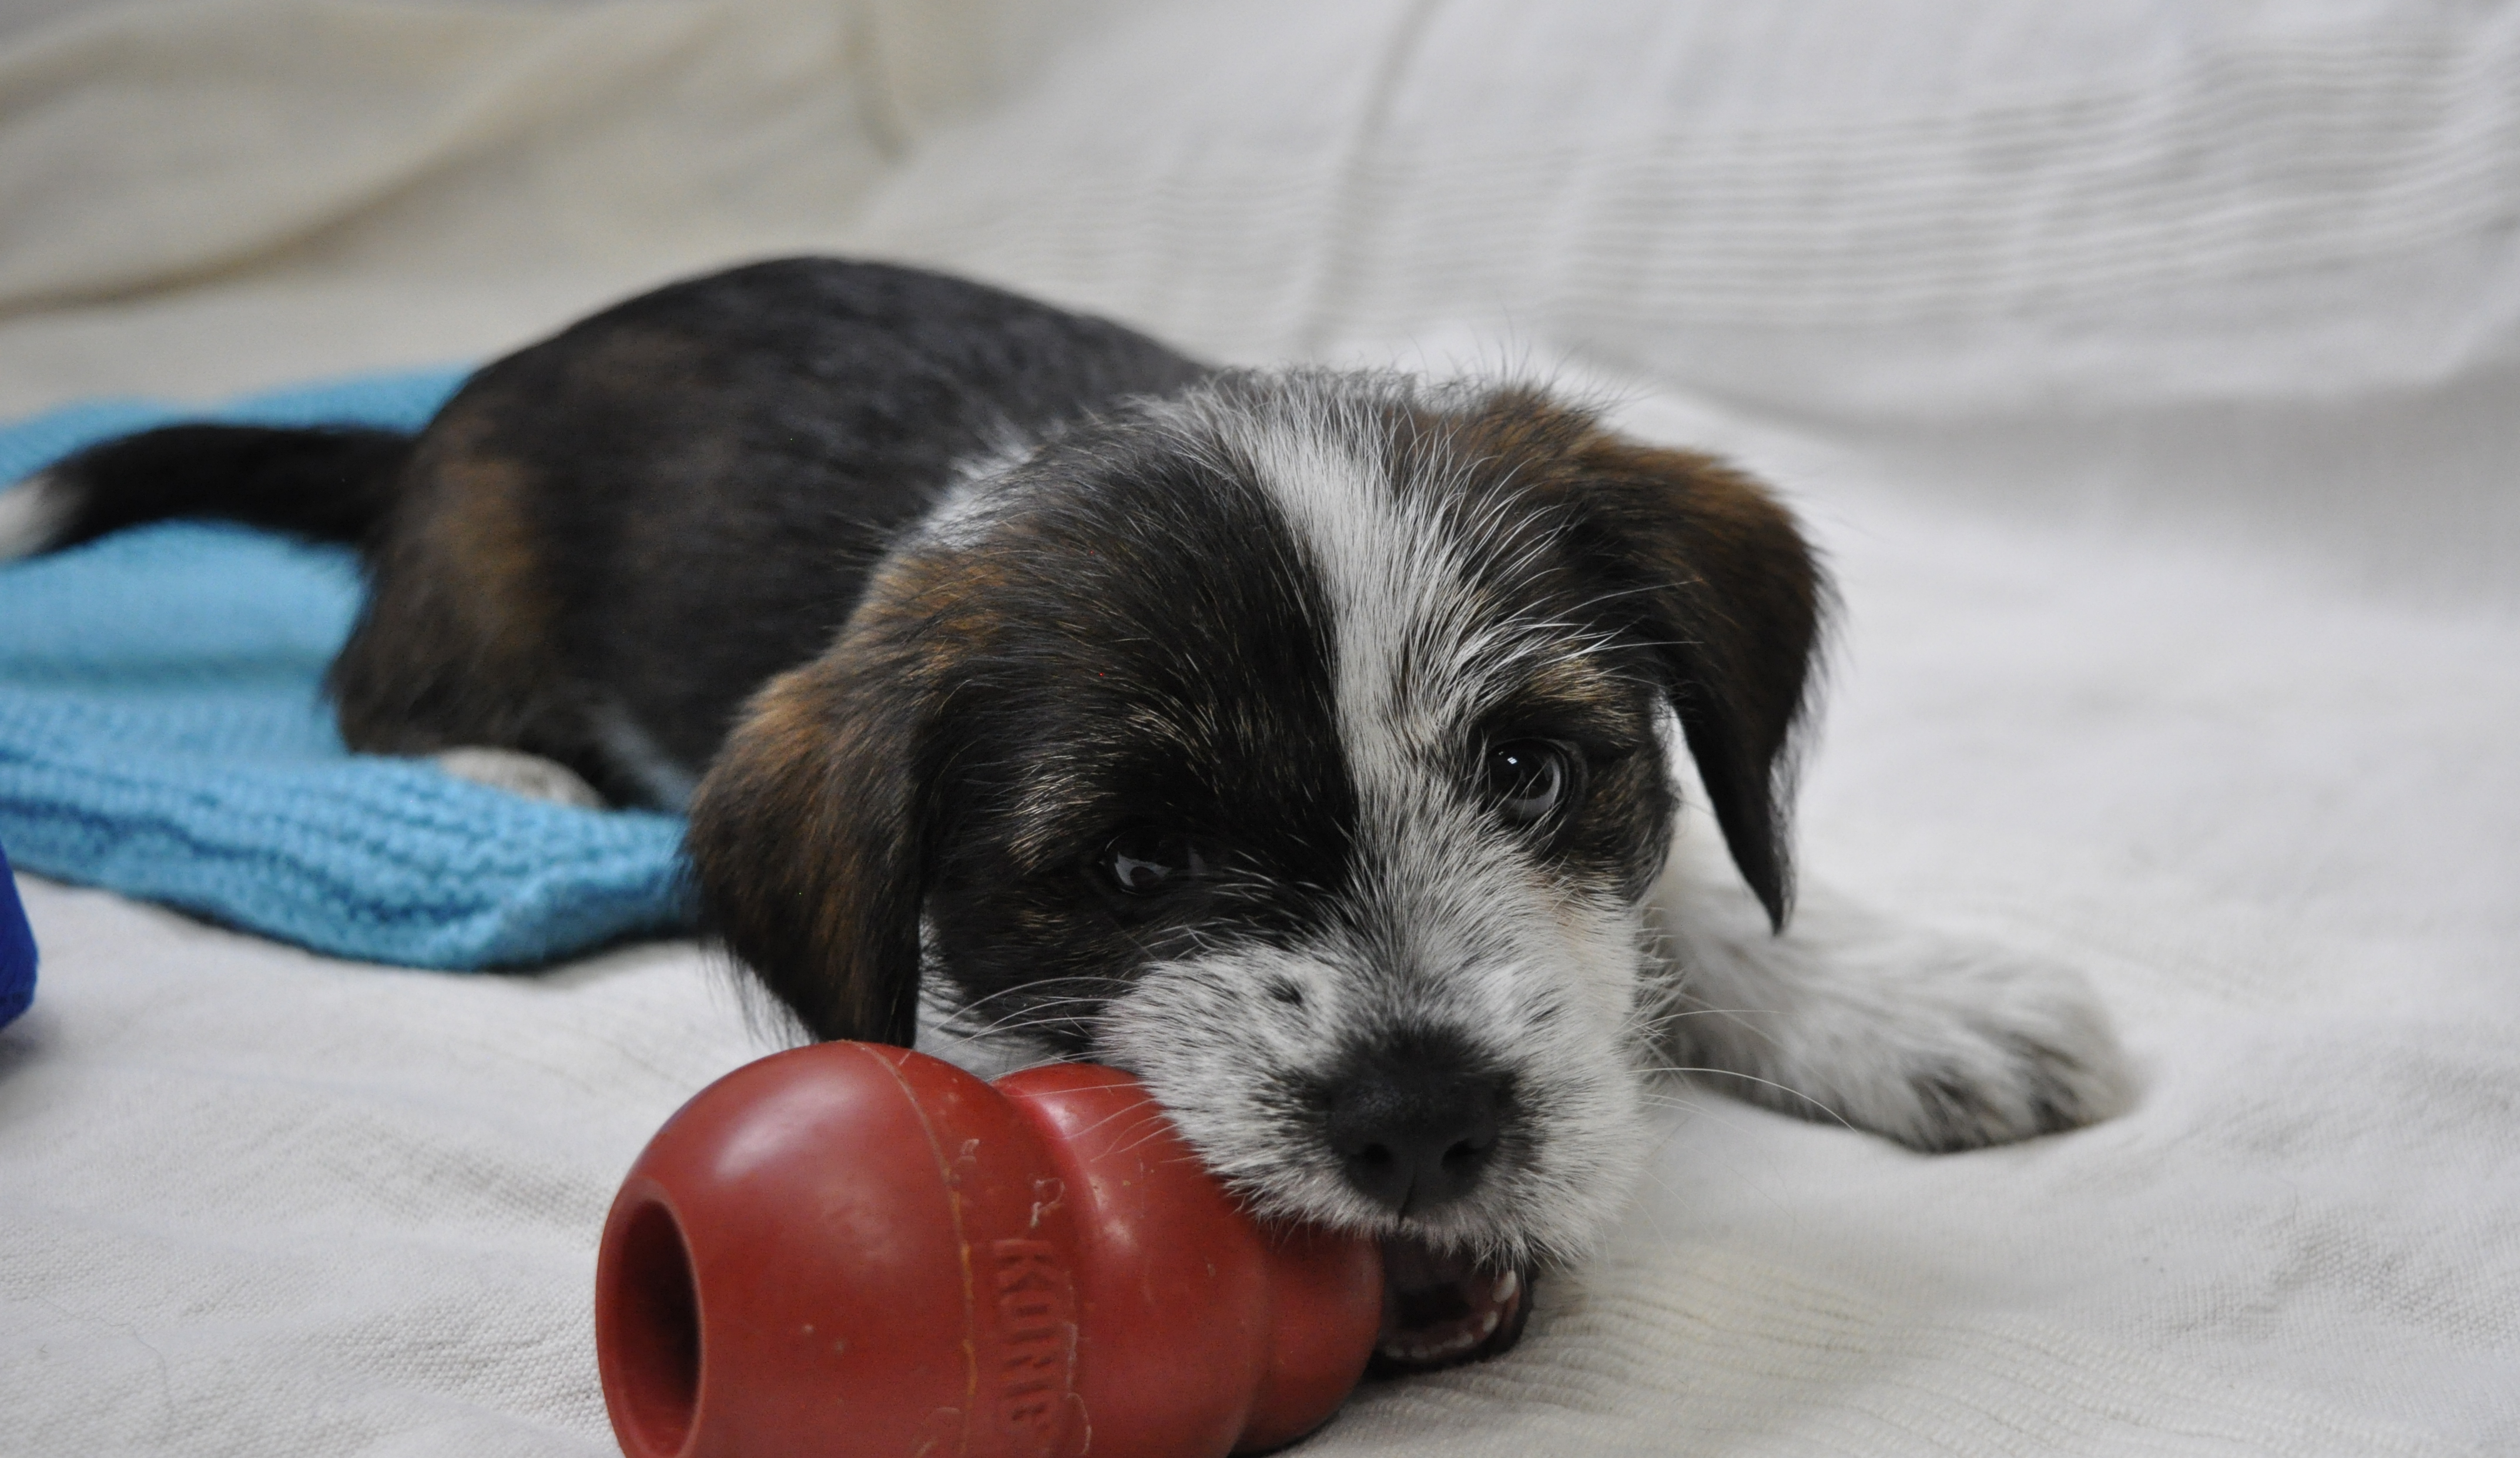 Puppy Max chews a kong toy